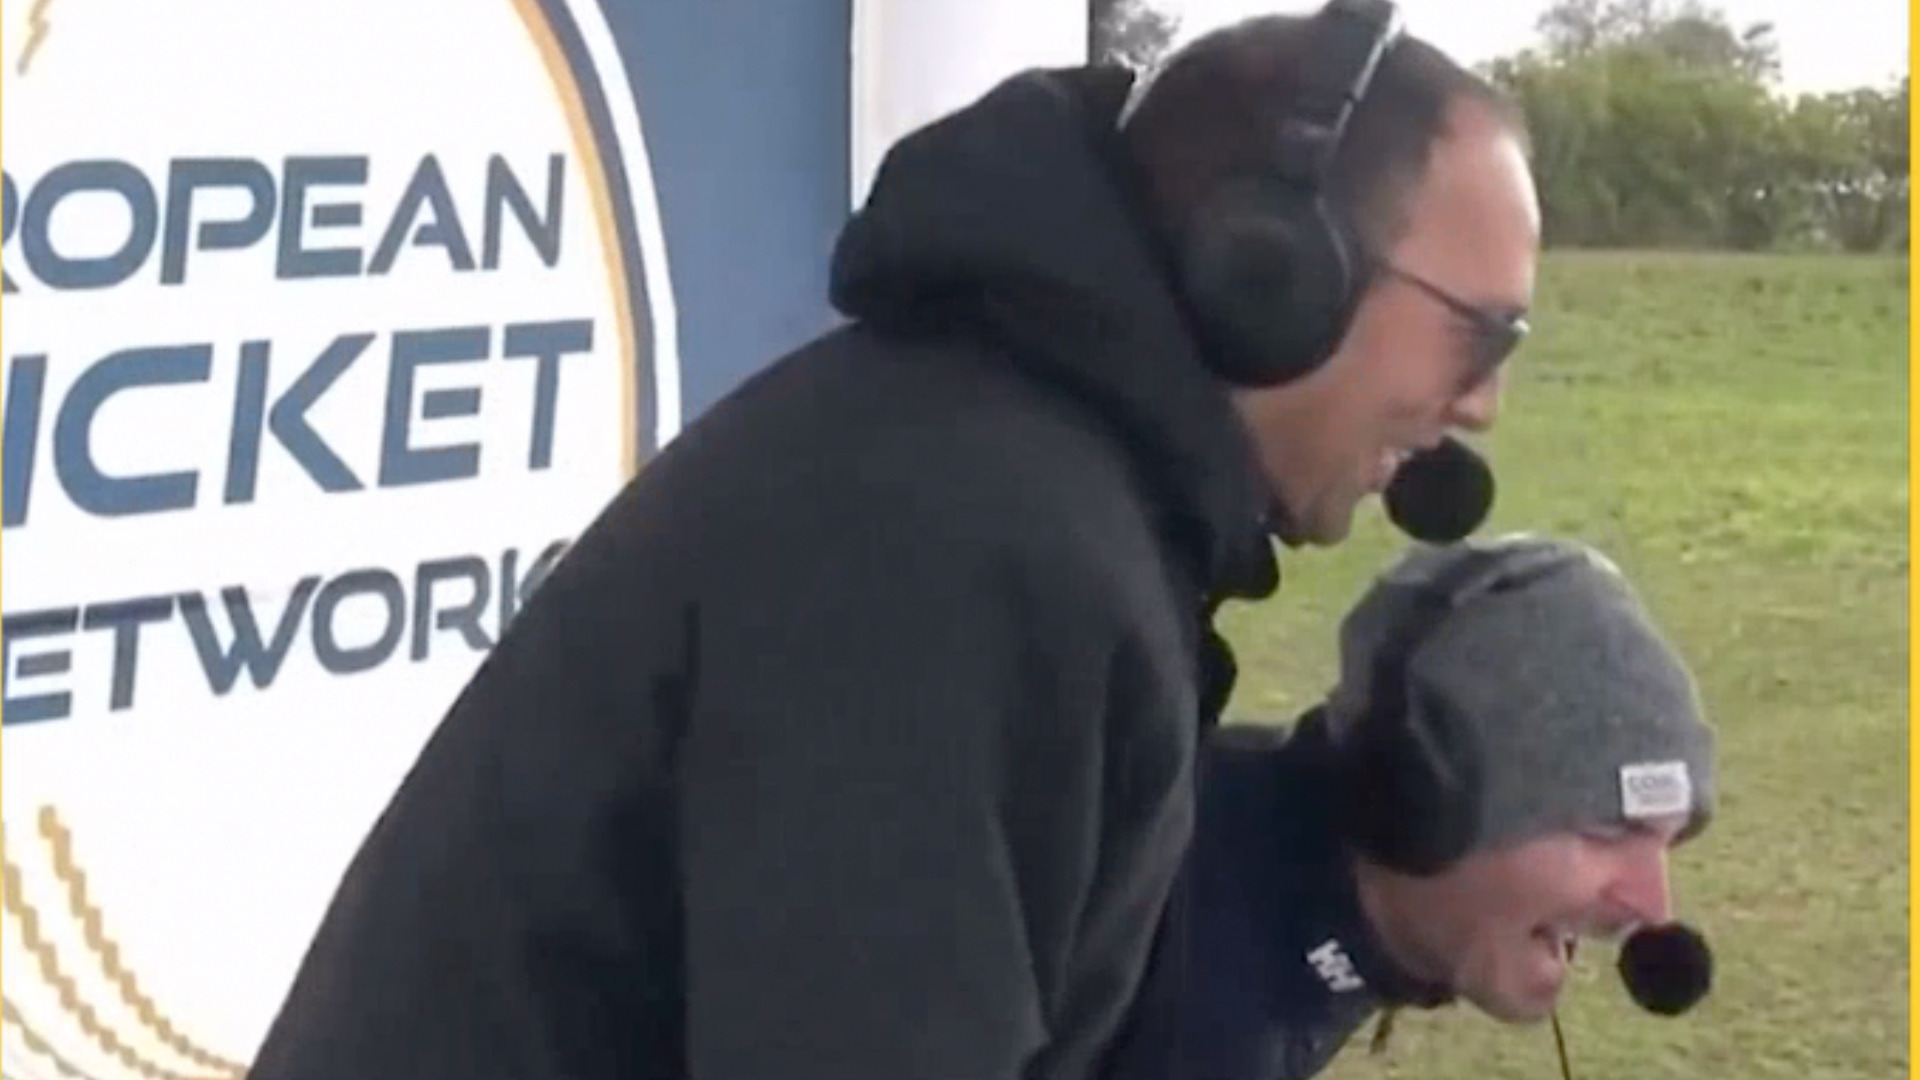 These cricket commentators can't keep it together on air (and it's amazing)